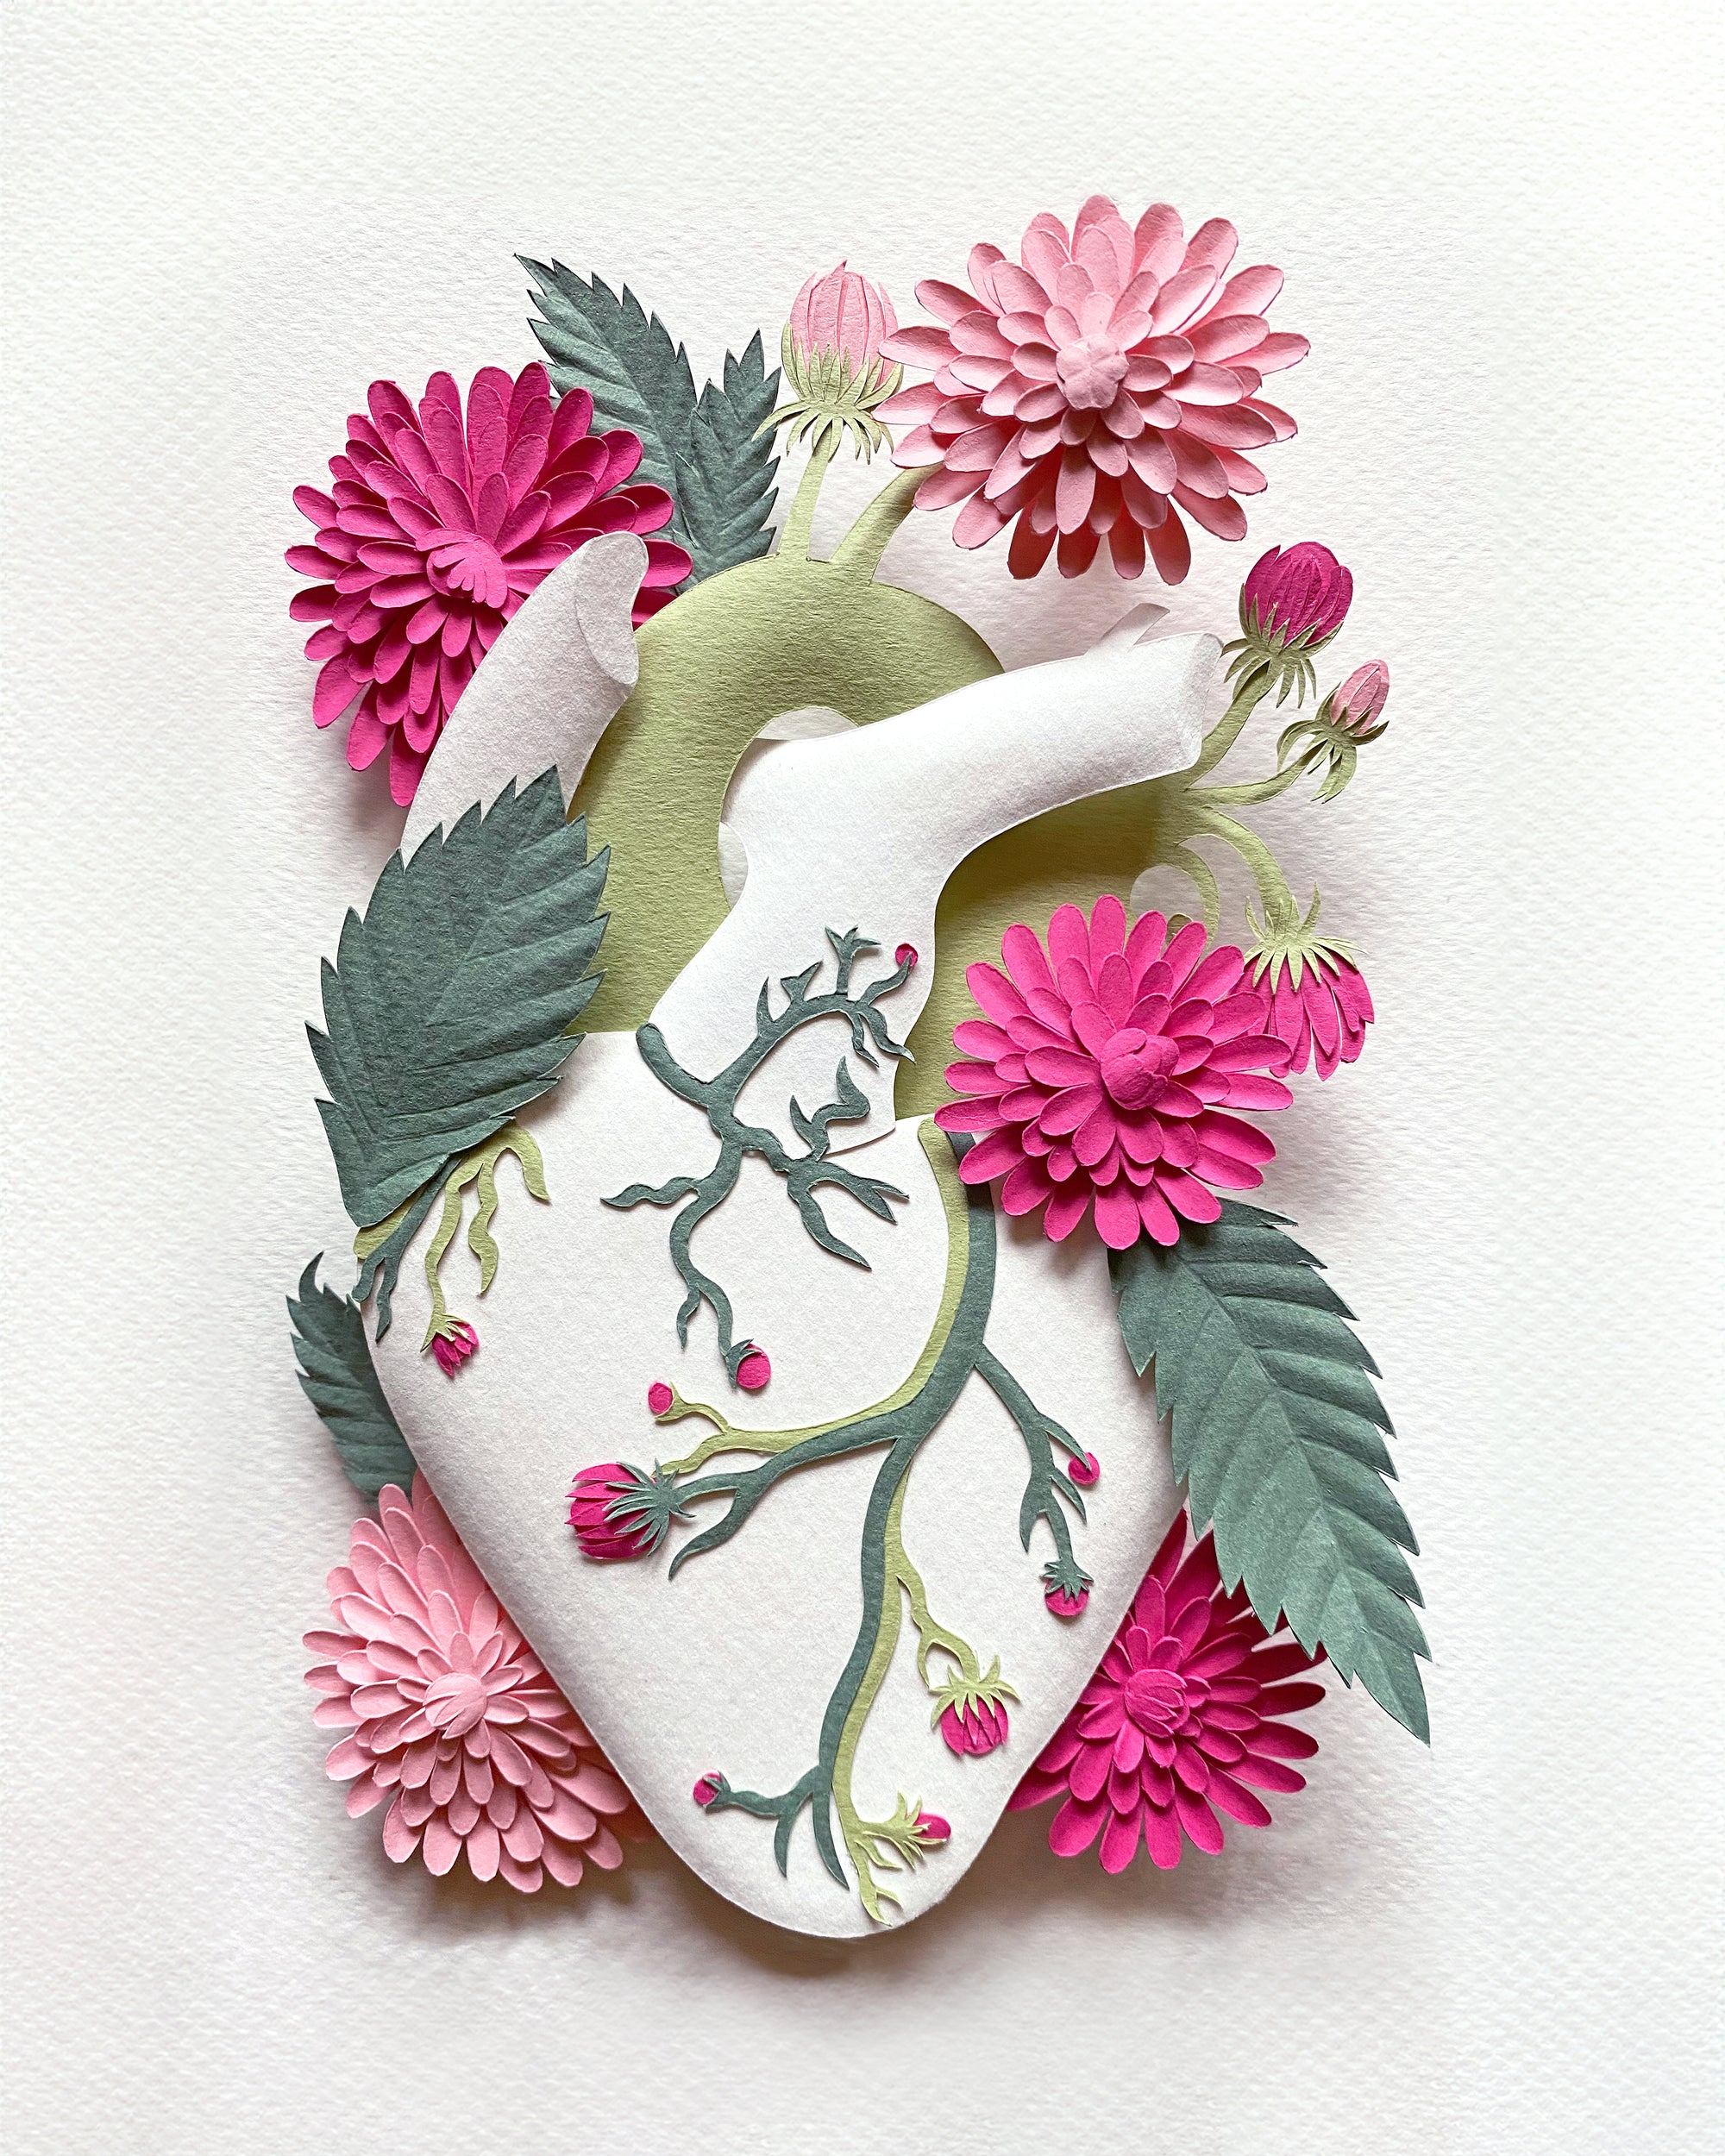 Anatomical heart made of cut paper with dahlia flowers